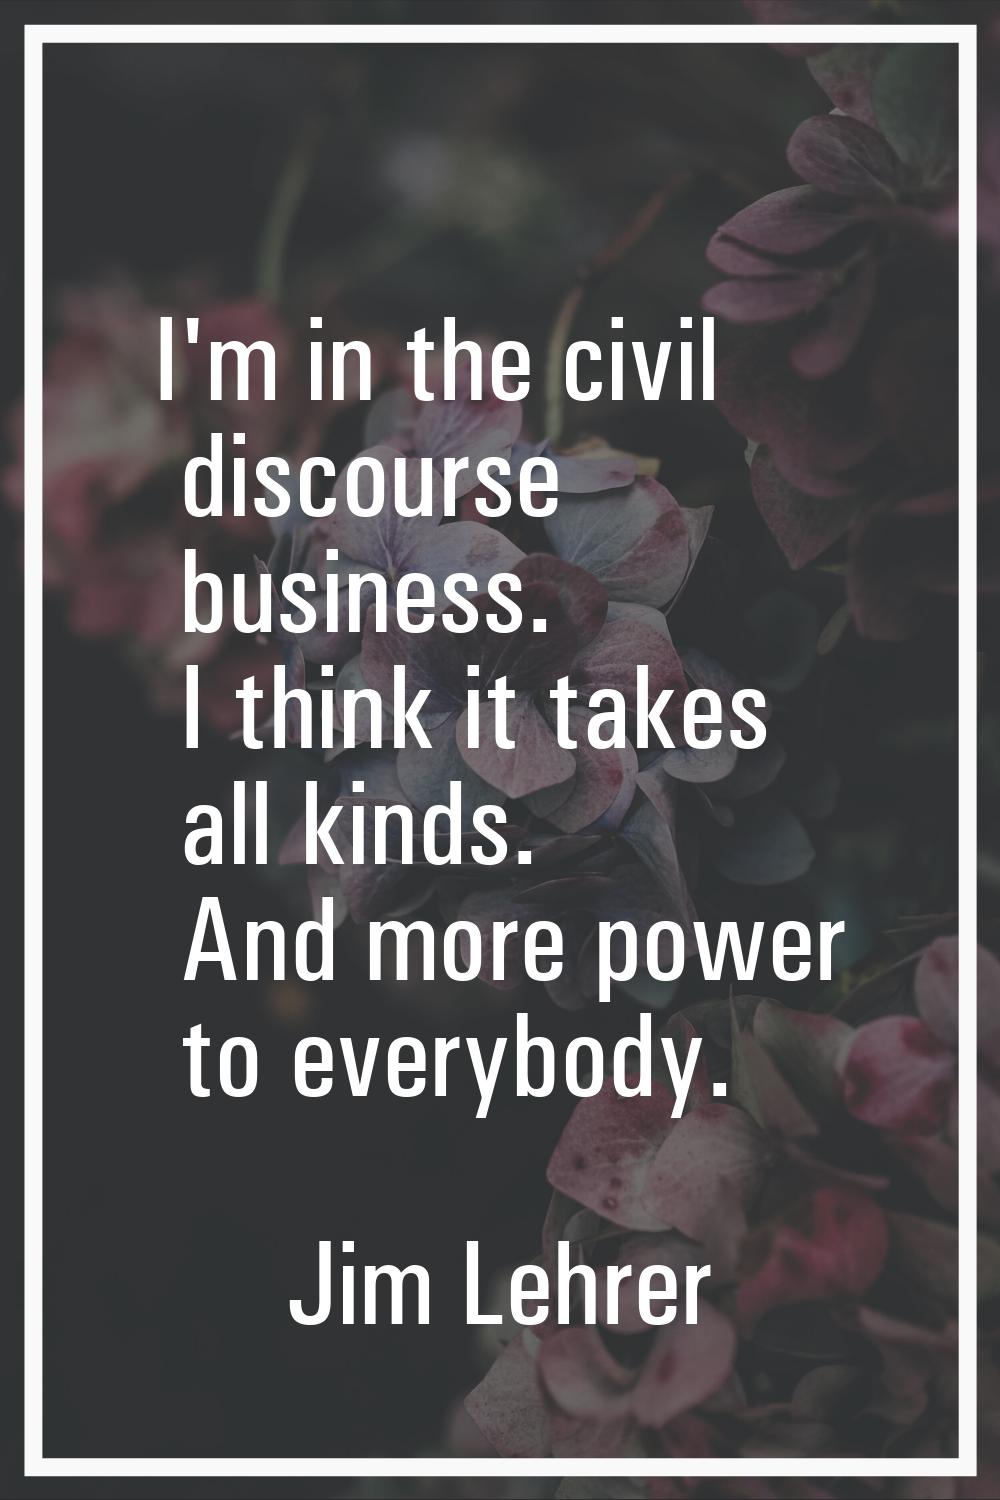 I'm in the civil discourse business. I think it takes all kinds. And more power to everybody.